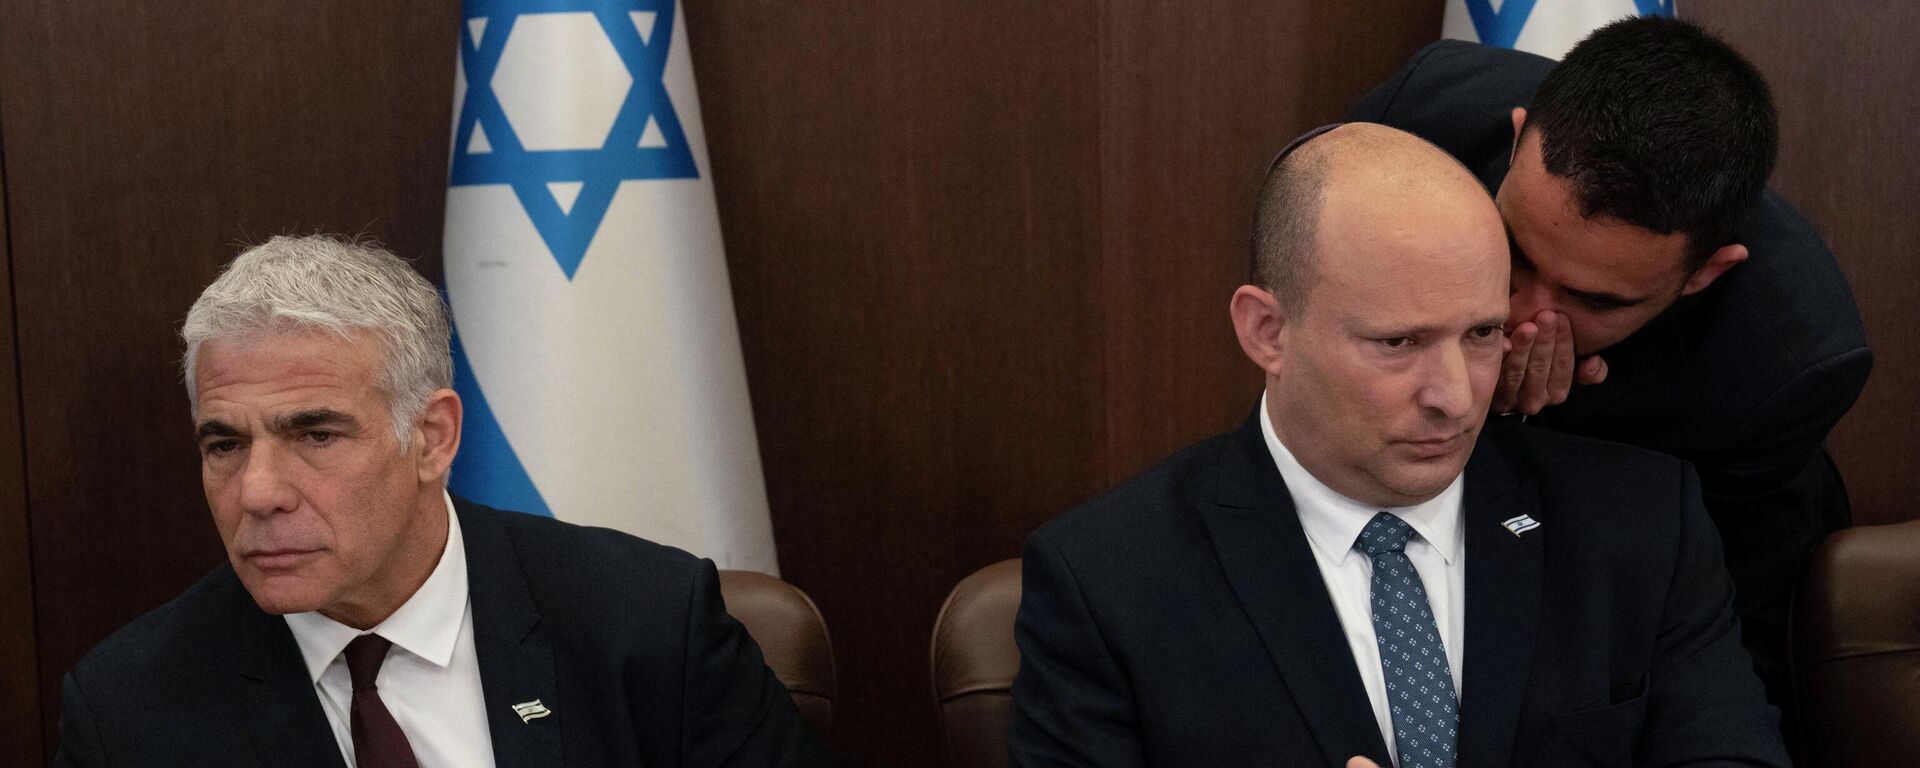 Israeli Prime Minister Naftali Bennett (R) listens to an aide as Foreign Minister Yair Lapid looks on during the weekly cabinet meeting in Jerusalem, on May 8, 2022 - Sputnik International, 1920, 20.06.2022